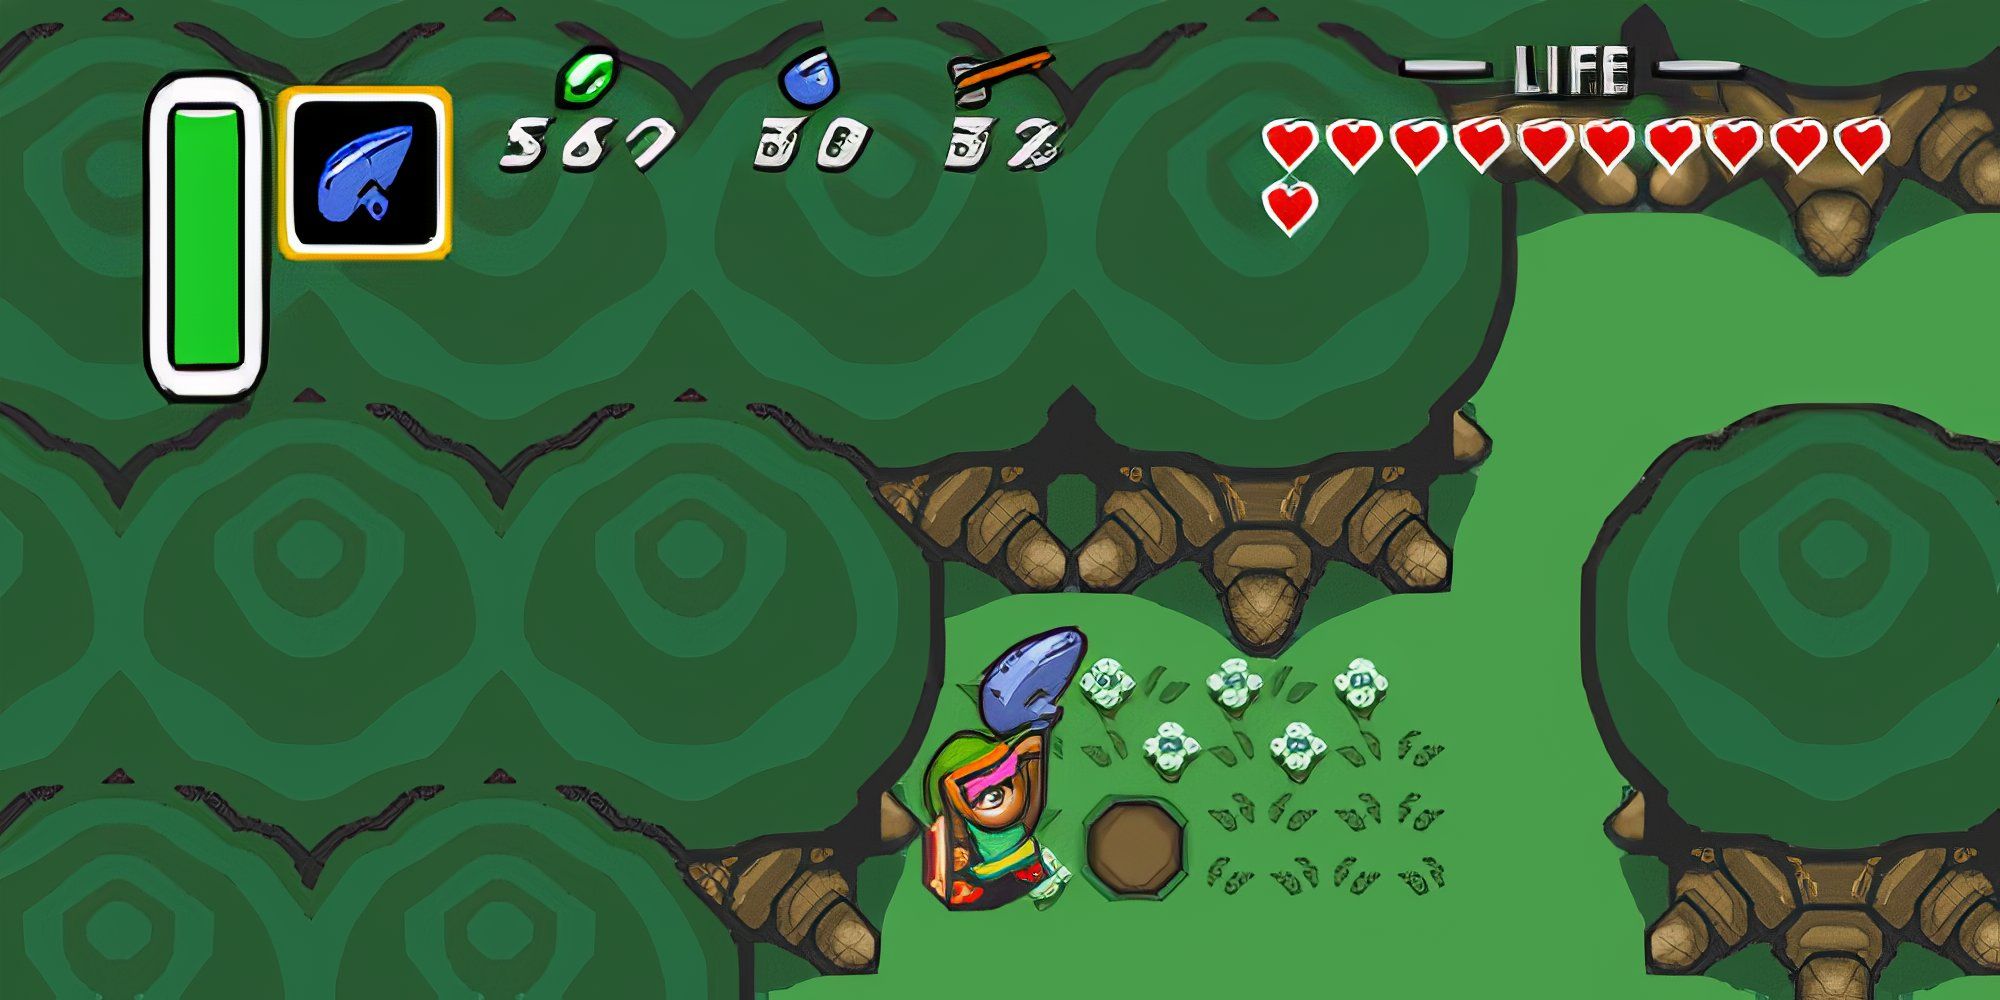 Getting the Flute in The Legend of Zelda A Link to the Past